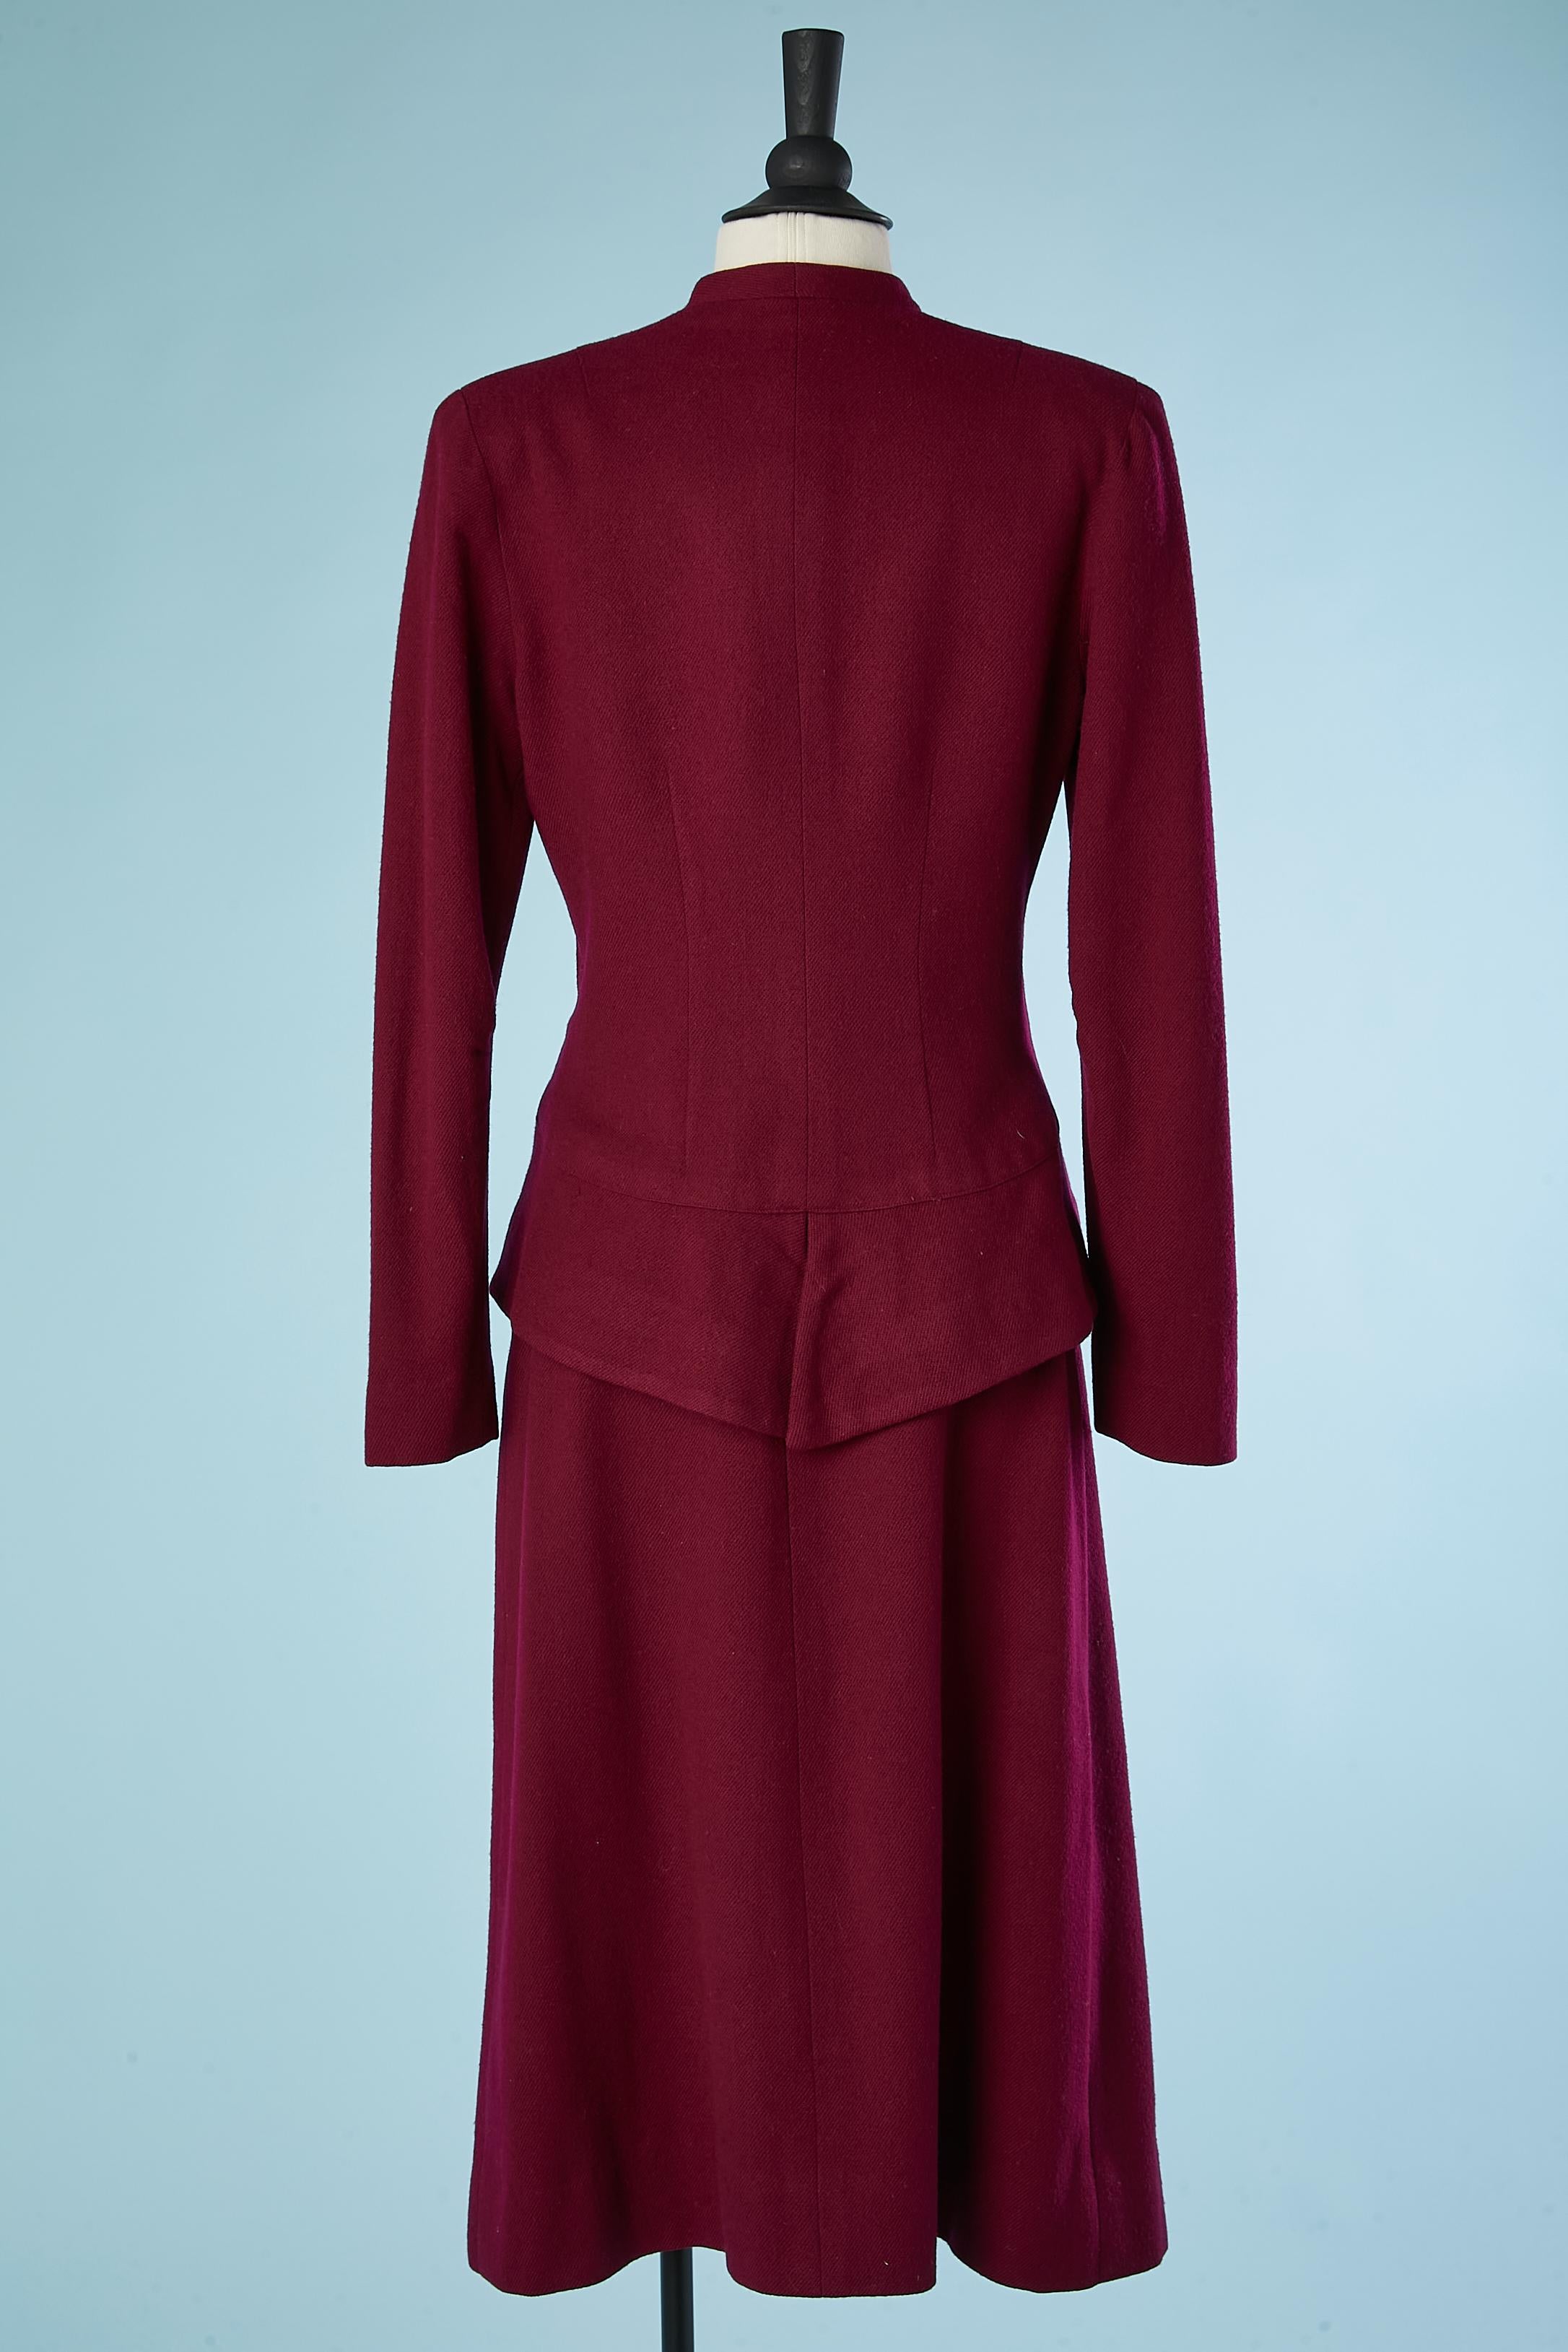 Women's Burgundy skirt-suit in wool with jewellery buttons Circa 1940/50 For Sale